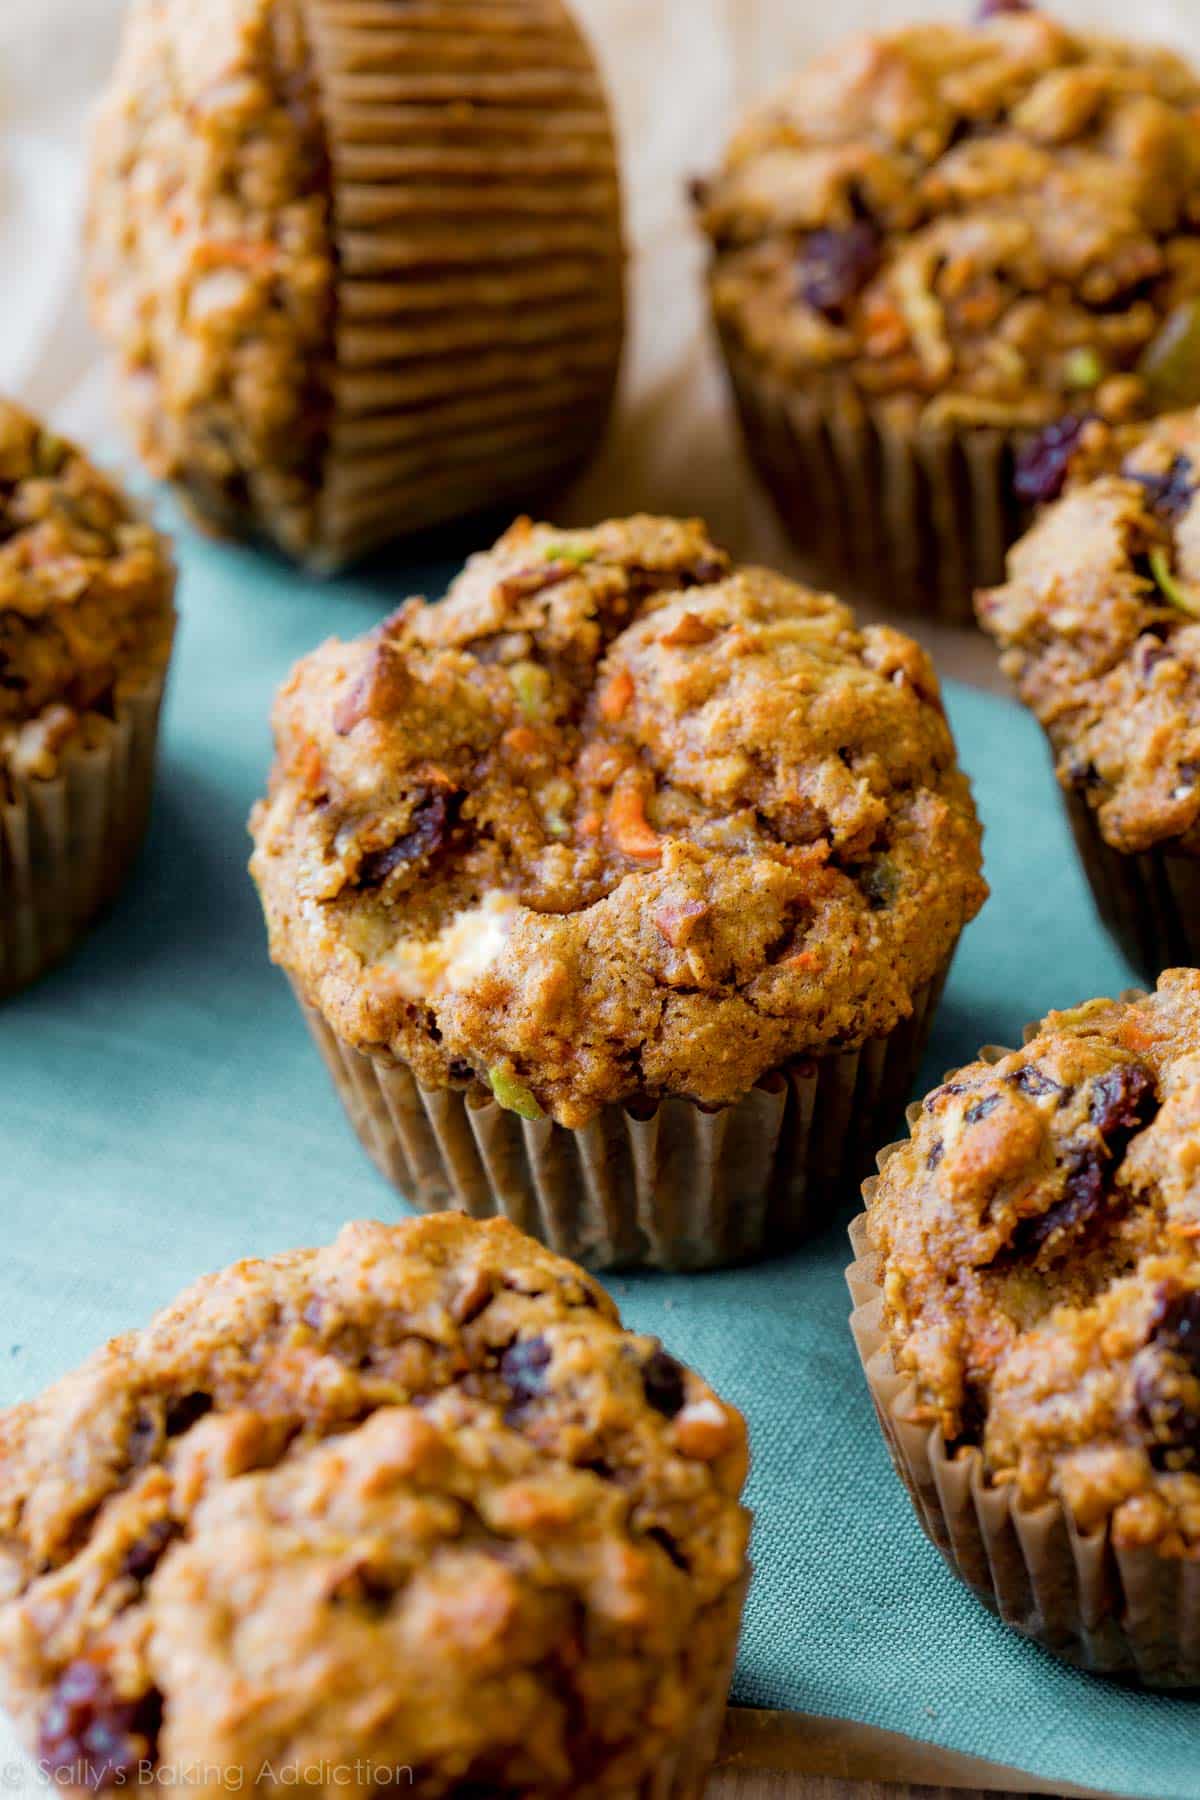 Freshly baked muffins with visible fruit and nut pieces are arranged on a teal napkin against a soft-focus background.